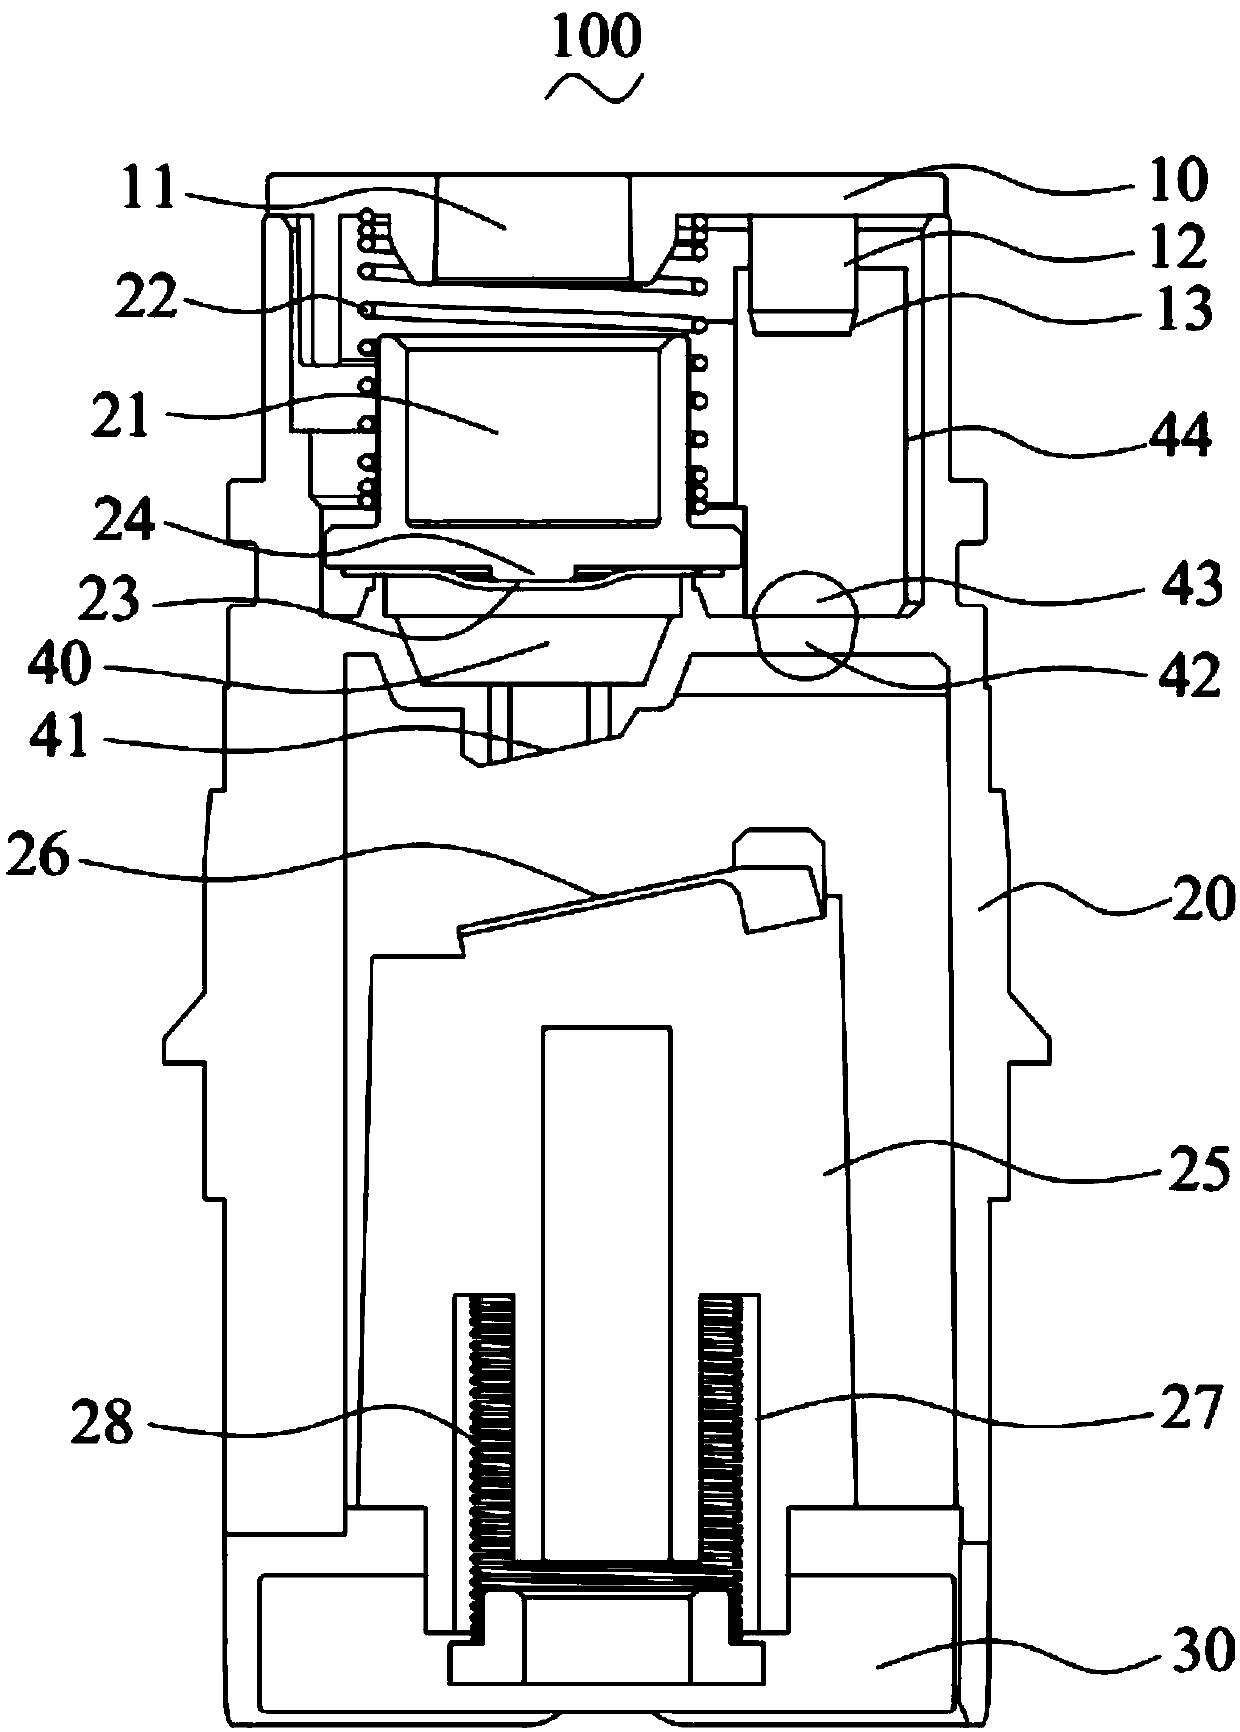 Integrated control valve and oil tank using integrated control valve